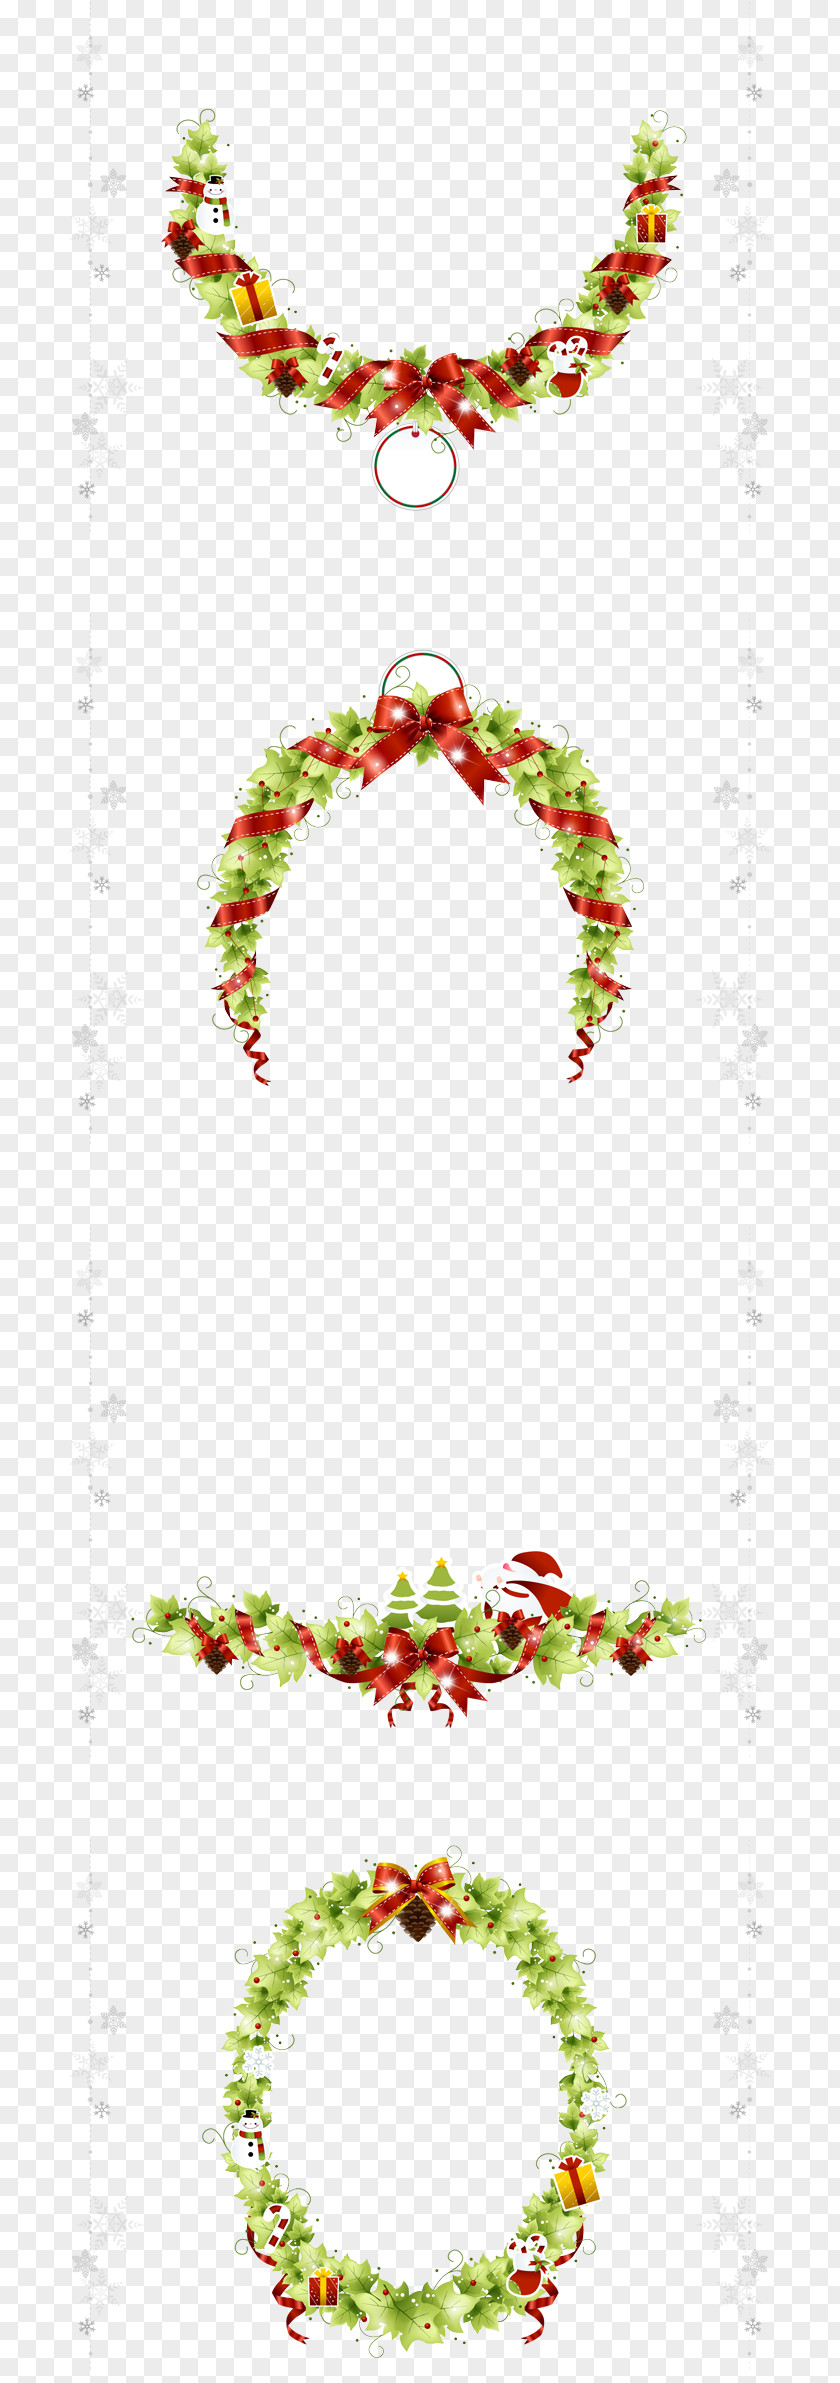 Christmas Decoration Ring The Third Group Santa Claus Wreath Clip Art PNG